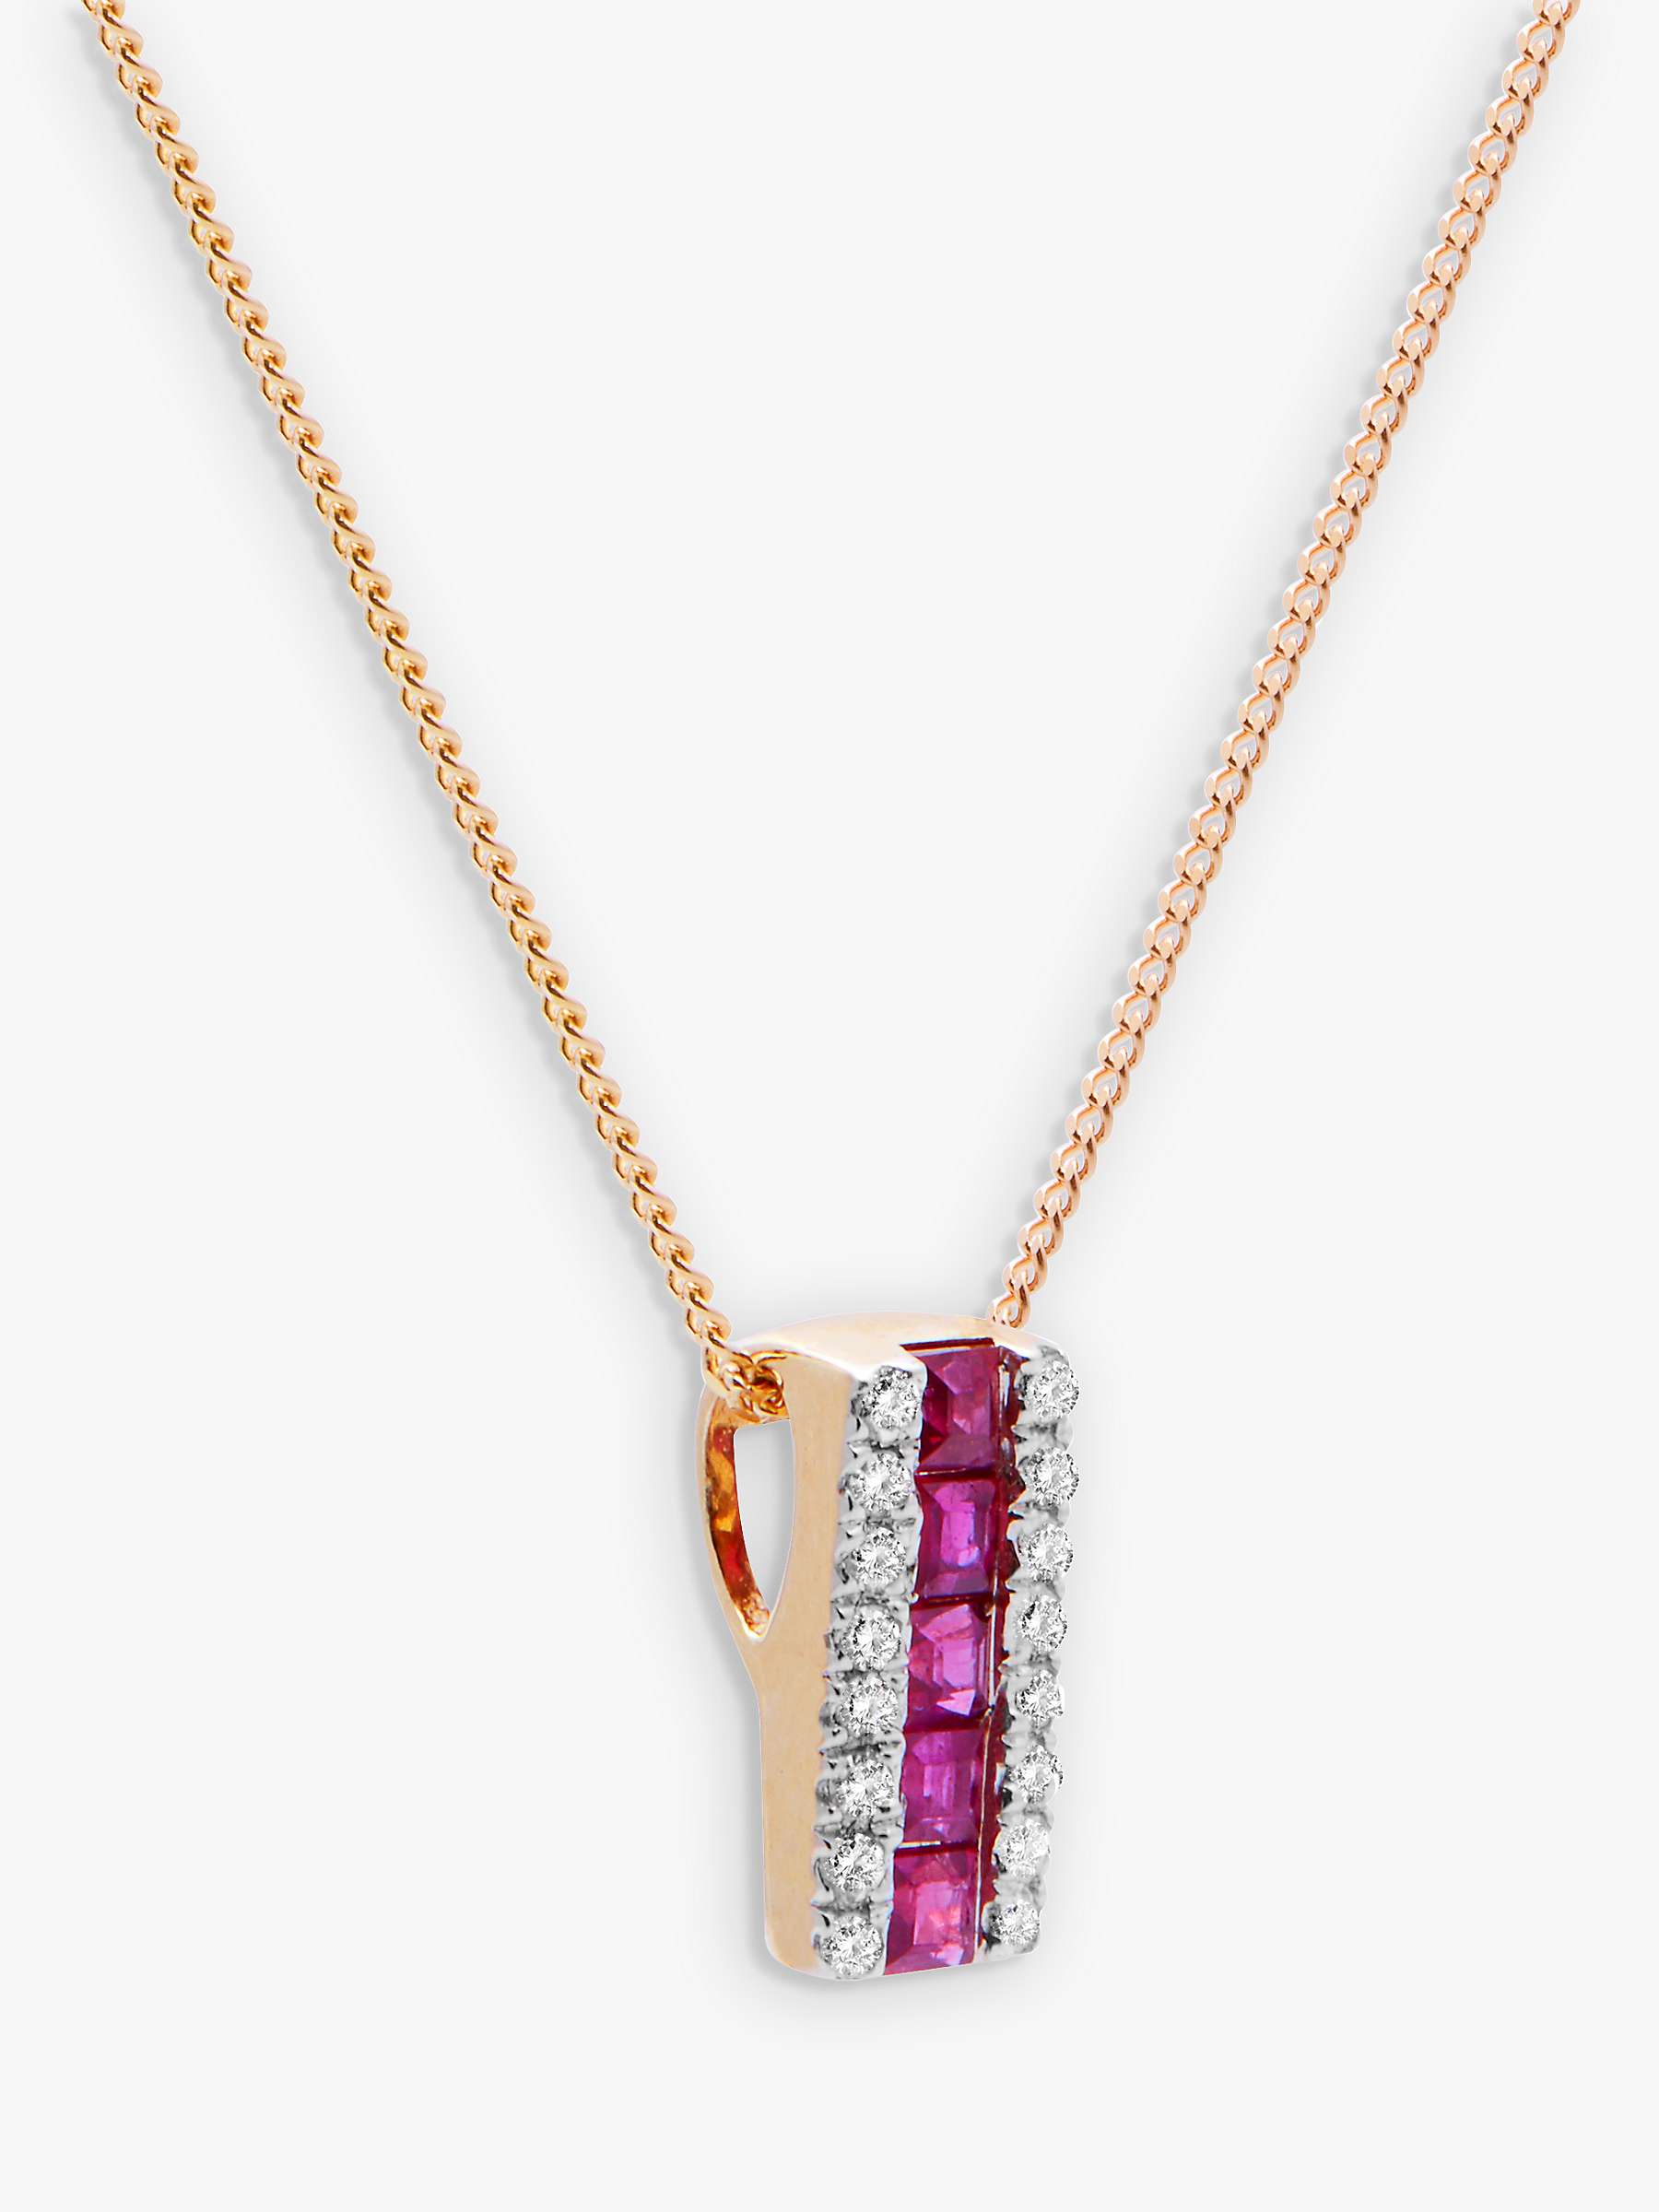 Buy A B Davis 9ct Gold Diamond and Ruby Rectangular Pendant Necklace Online at johnlewis.com